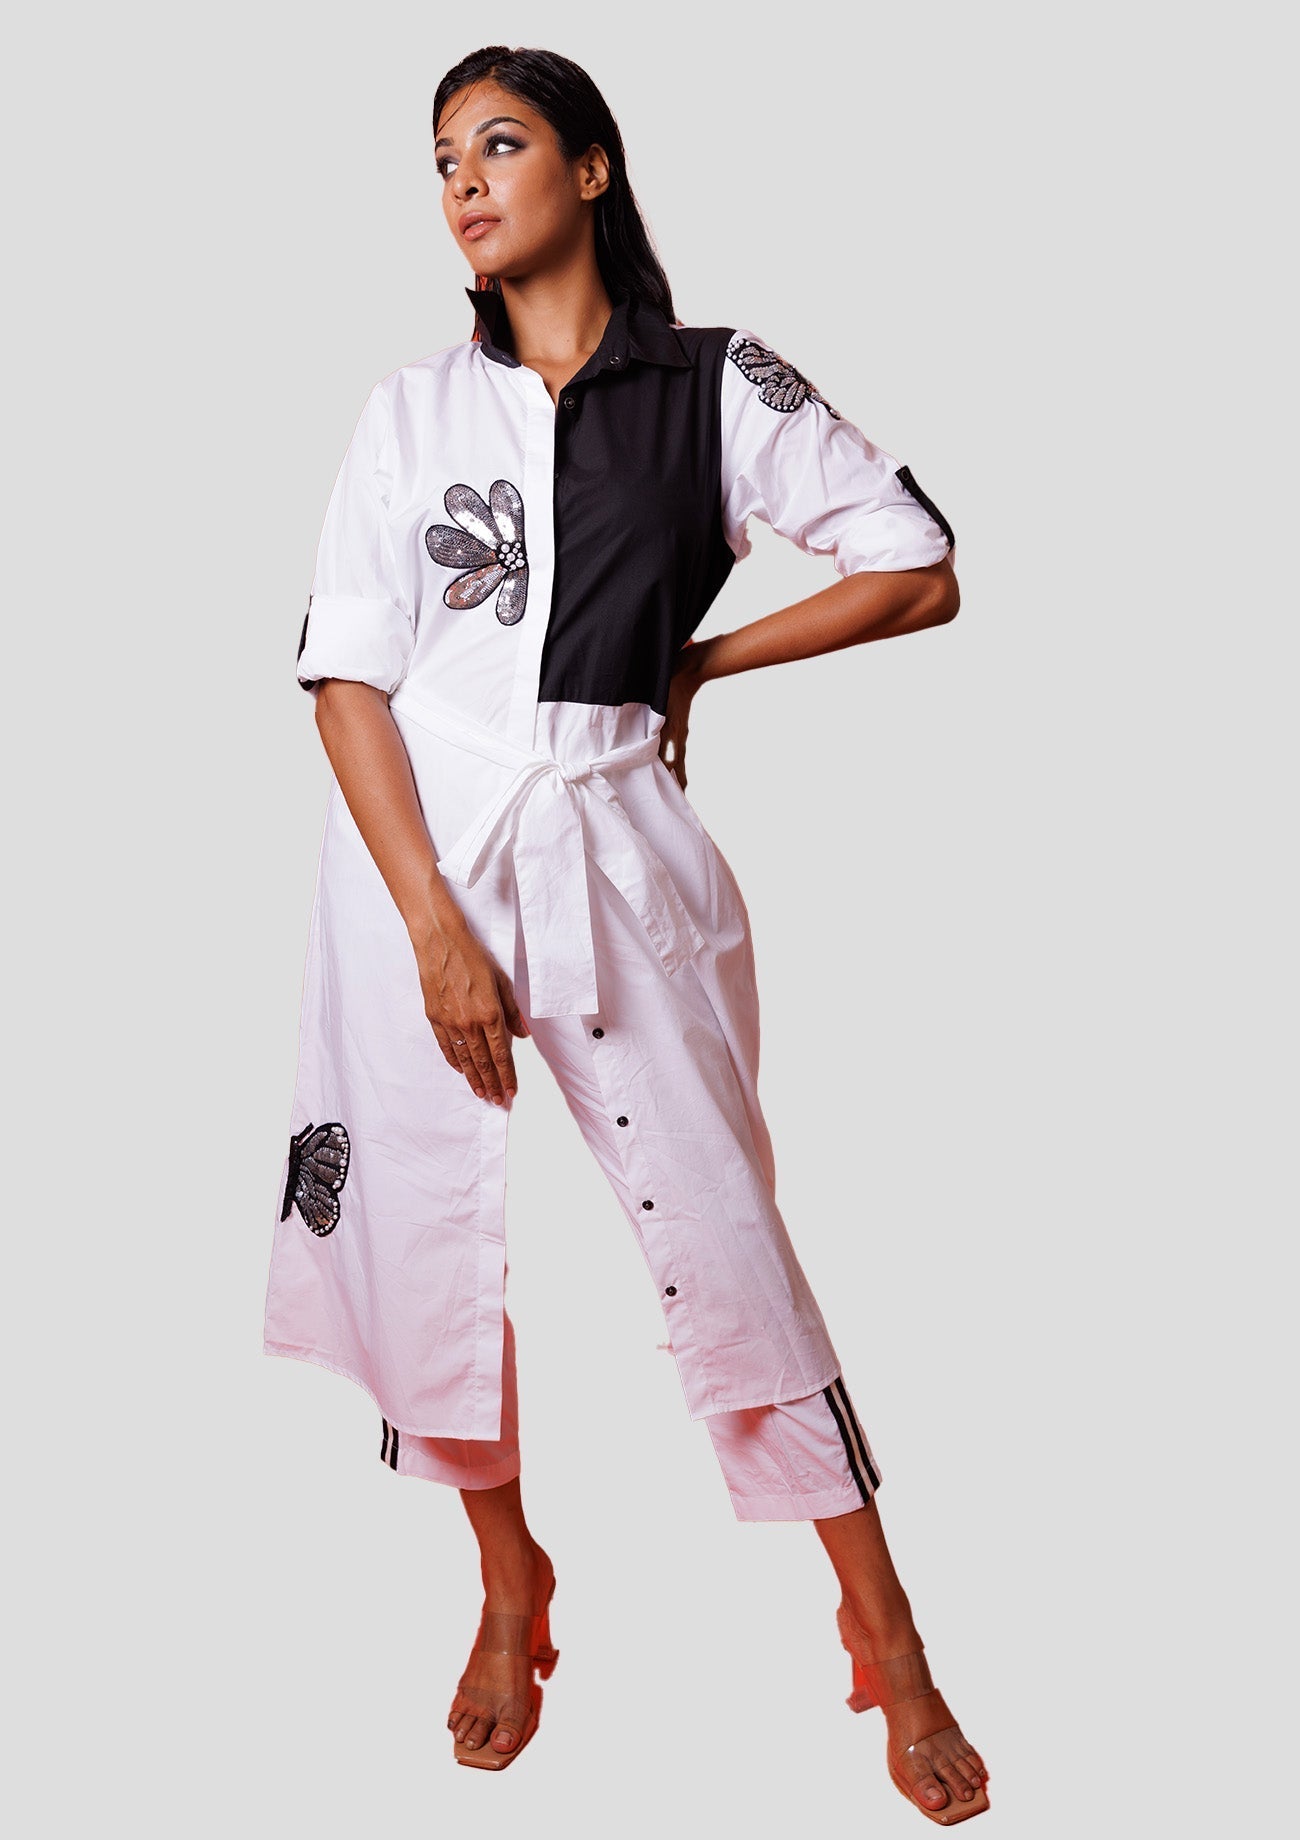 White Cotton Trench Shirt With Black Bodice And Silver Sequins Flower And Butterfly Embroidery With White Cotton Straight Pants